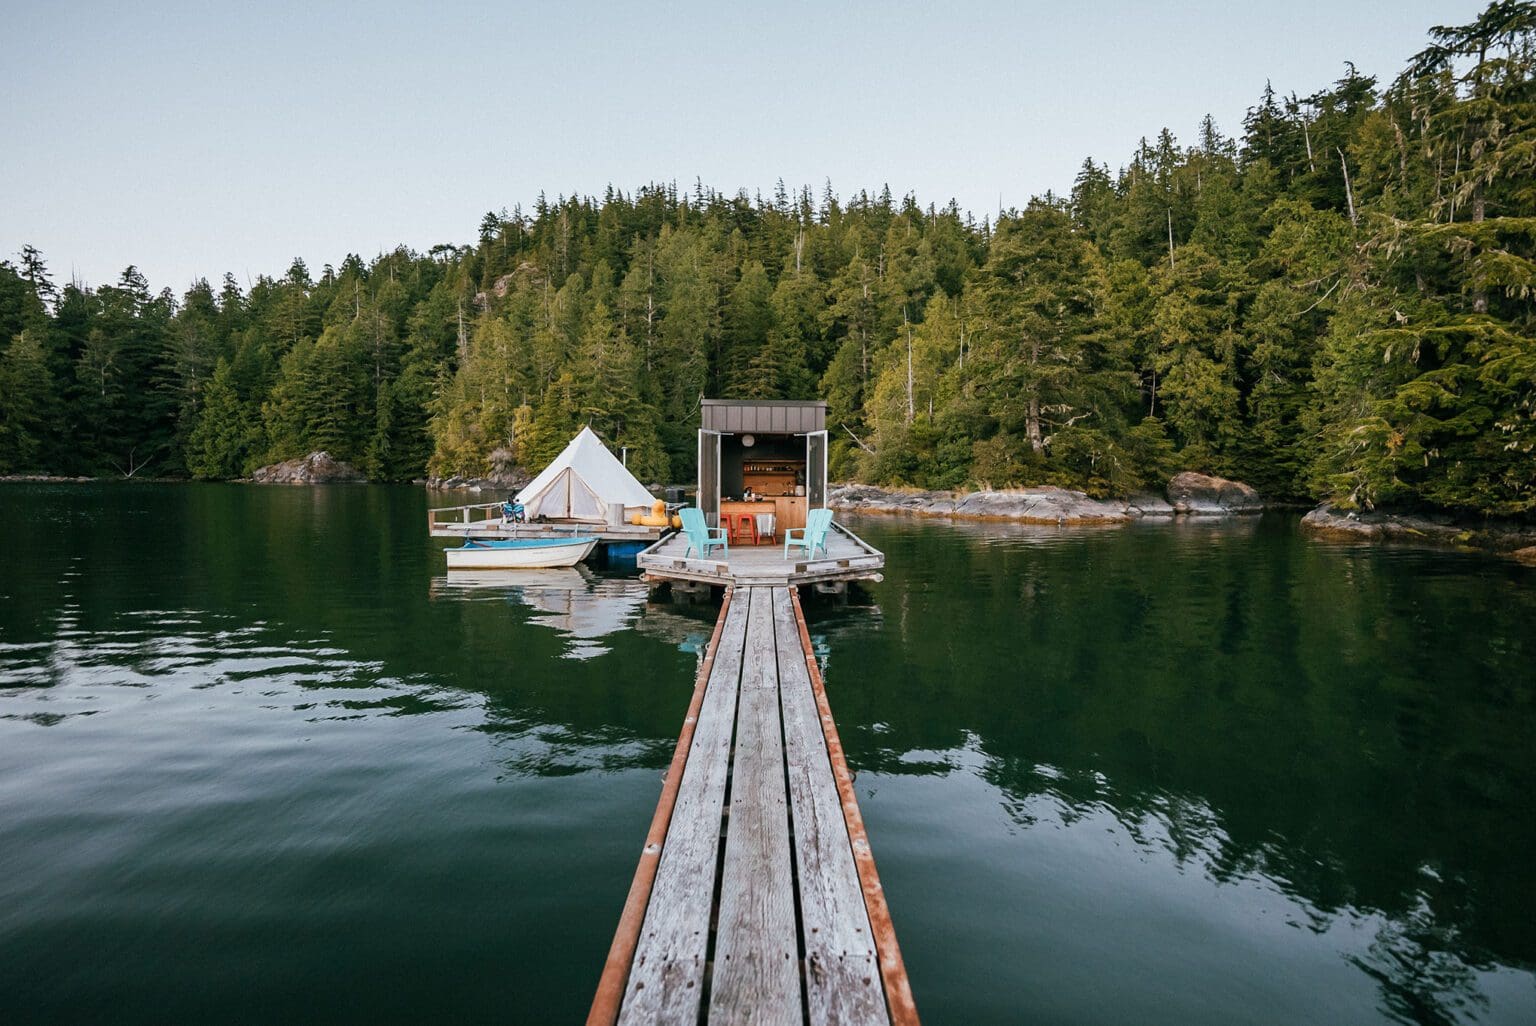 The lagoon float camp in Tofino British Columbia. The water is calm, the sky is blue and you are looking down the dock into the float camp.